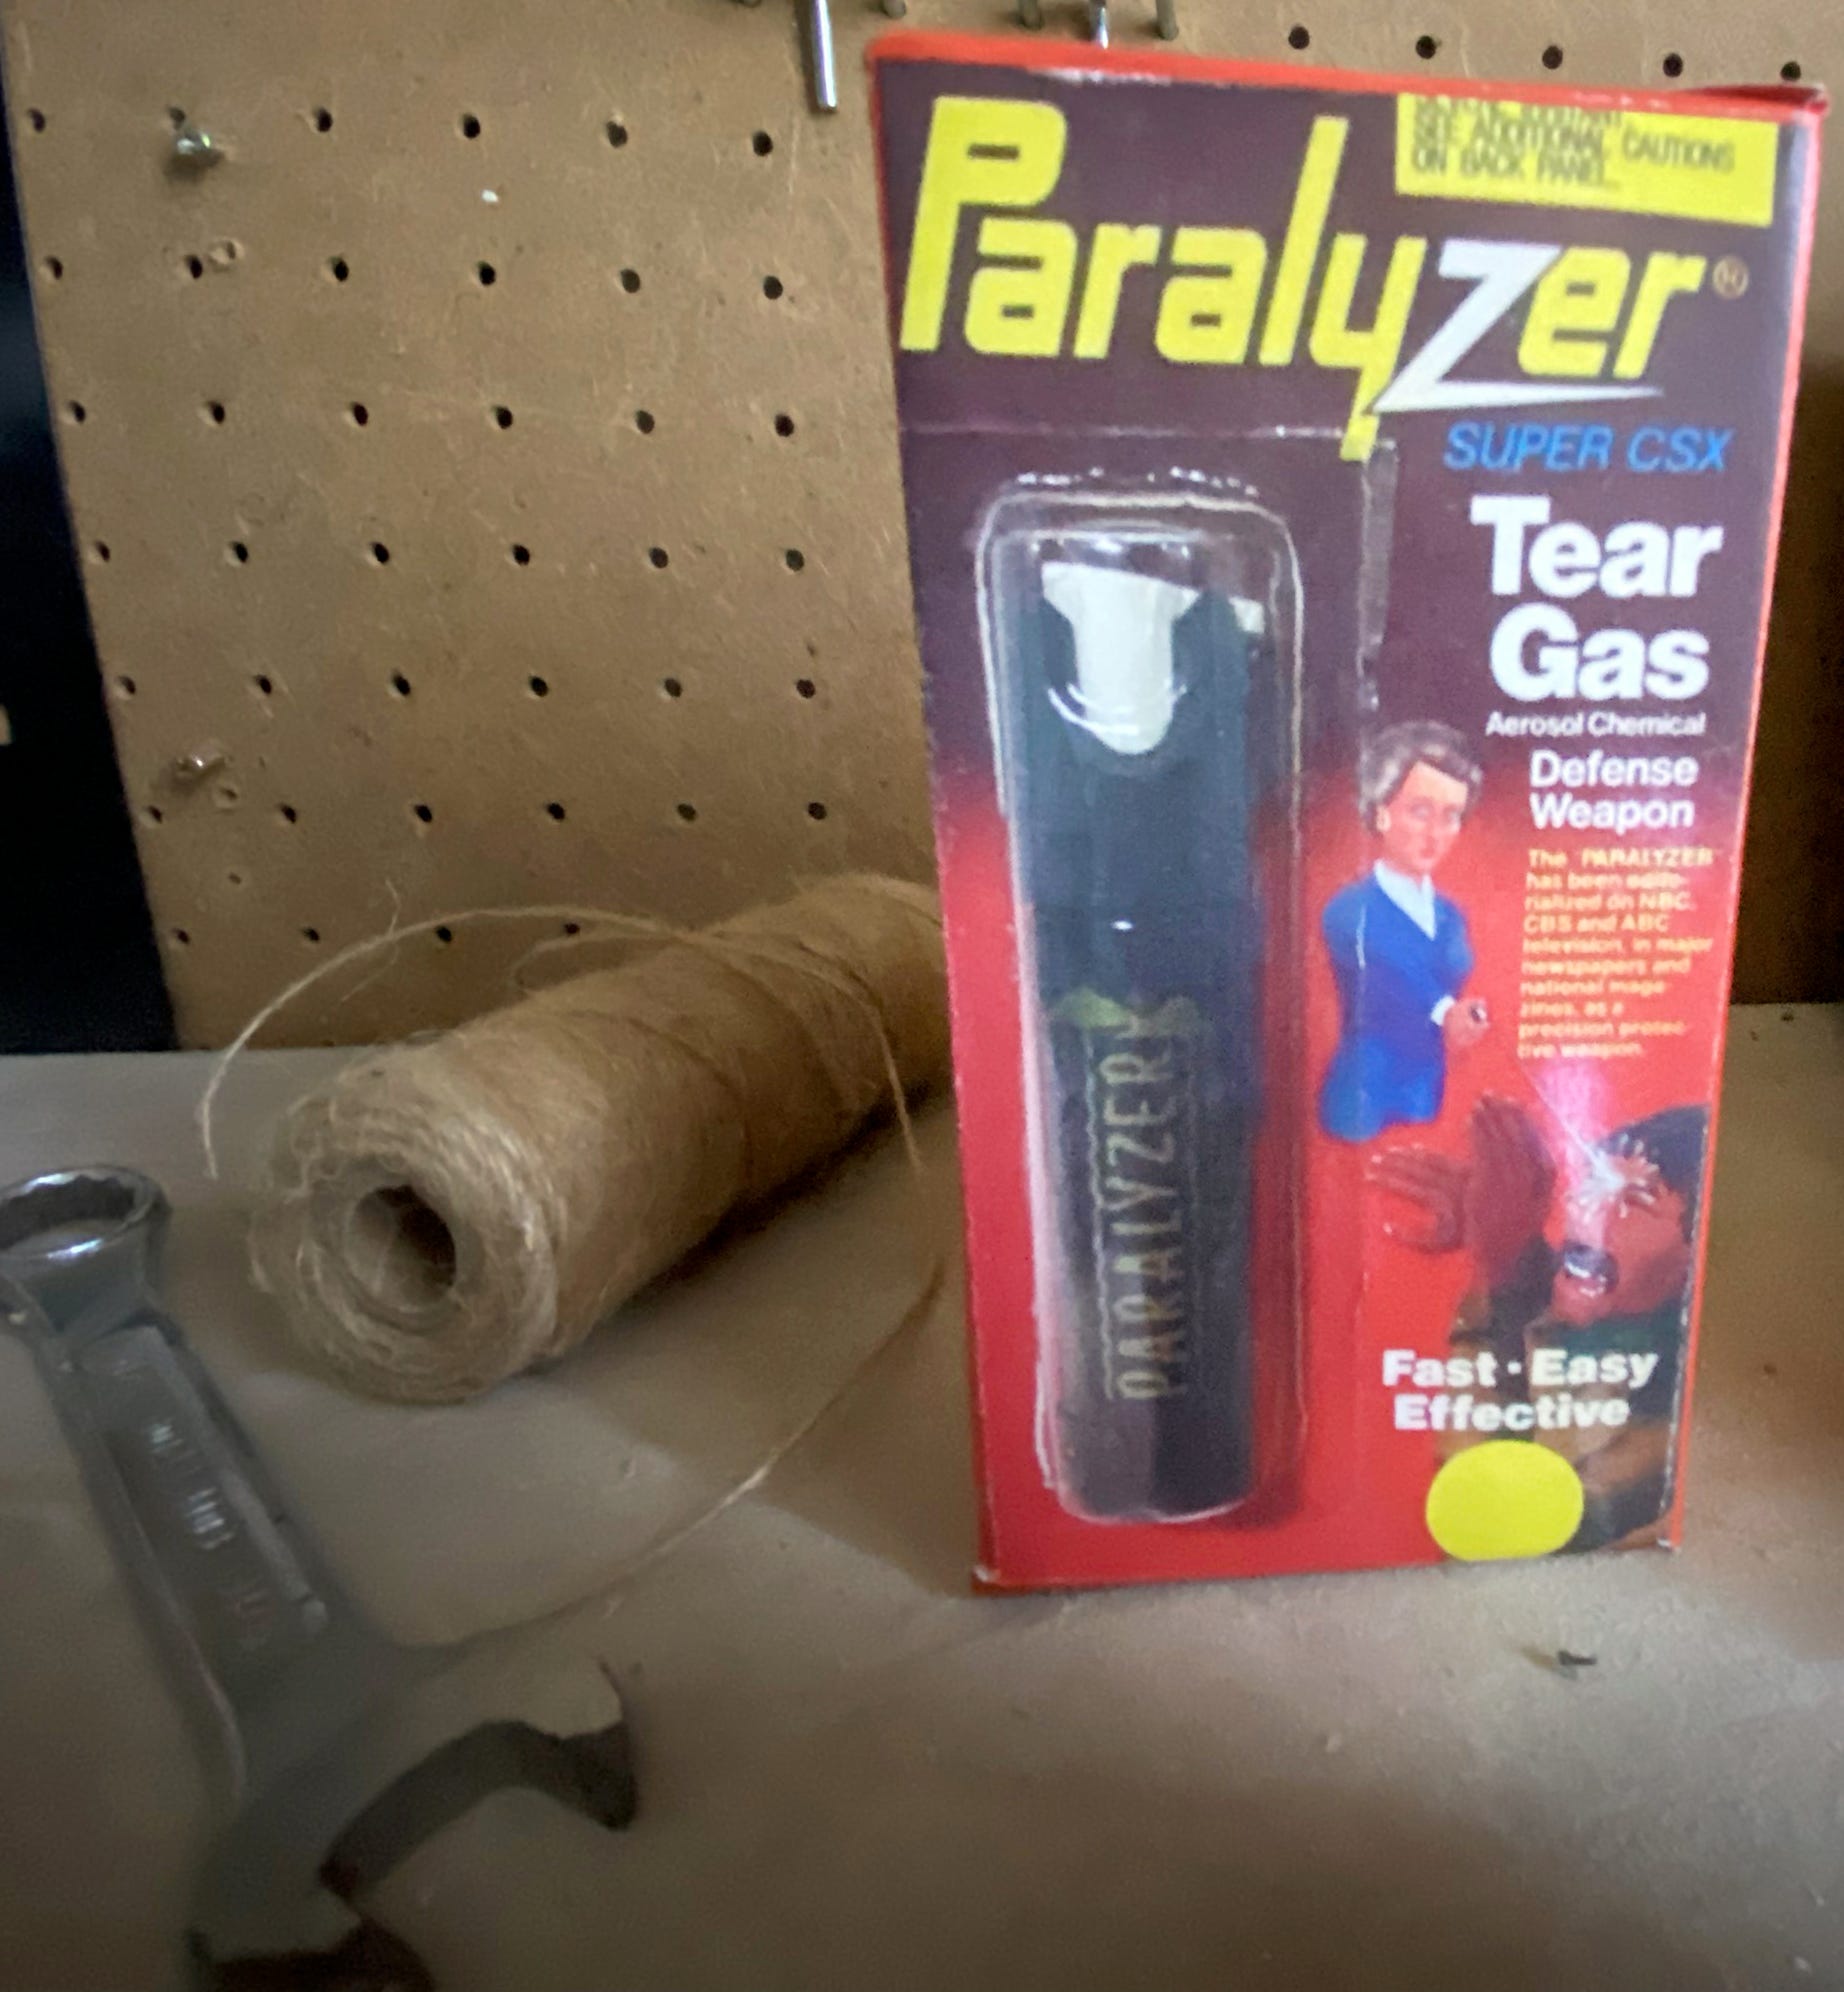 Packaging illustration for Paralyzer tear gas showed a white female in business attire defending herself against a dark-skinned man.